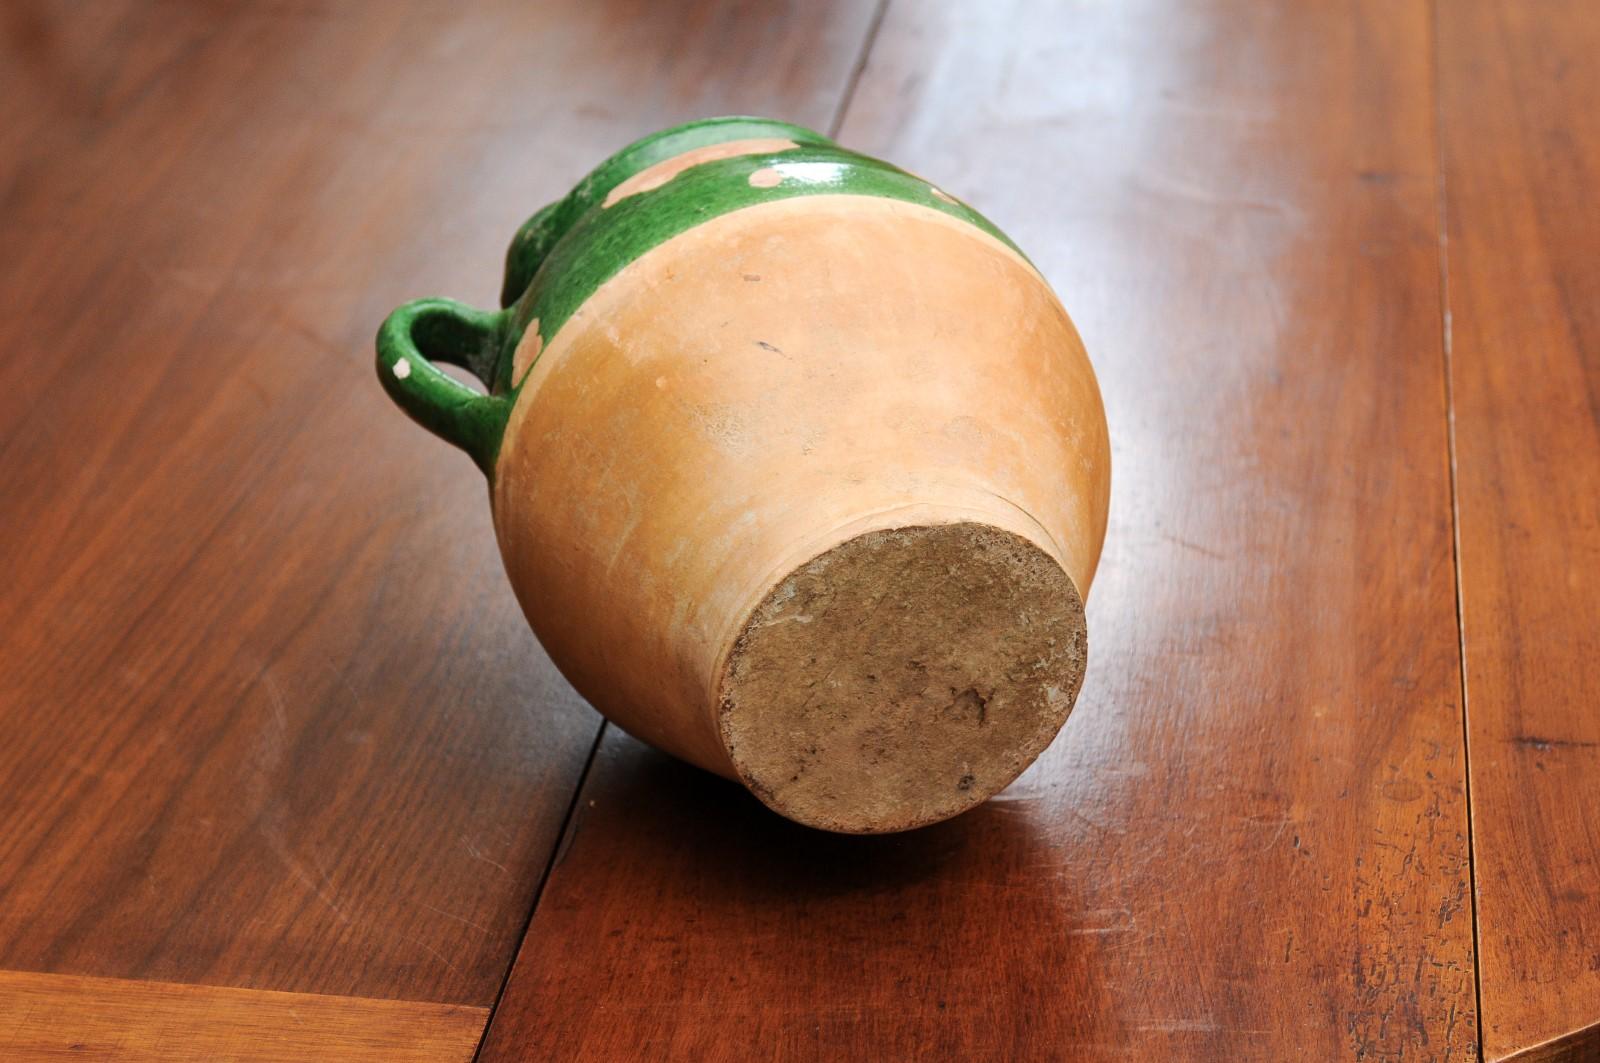 French Provincial 19th Century Green Glazed Olive Oil Jug with Weathered Patina 4